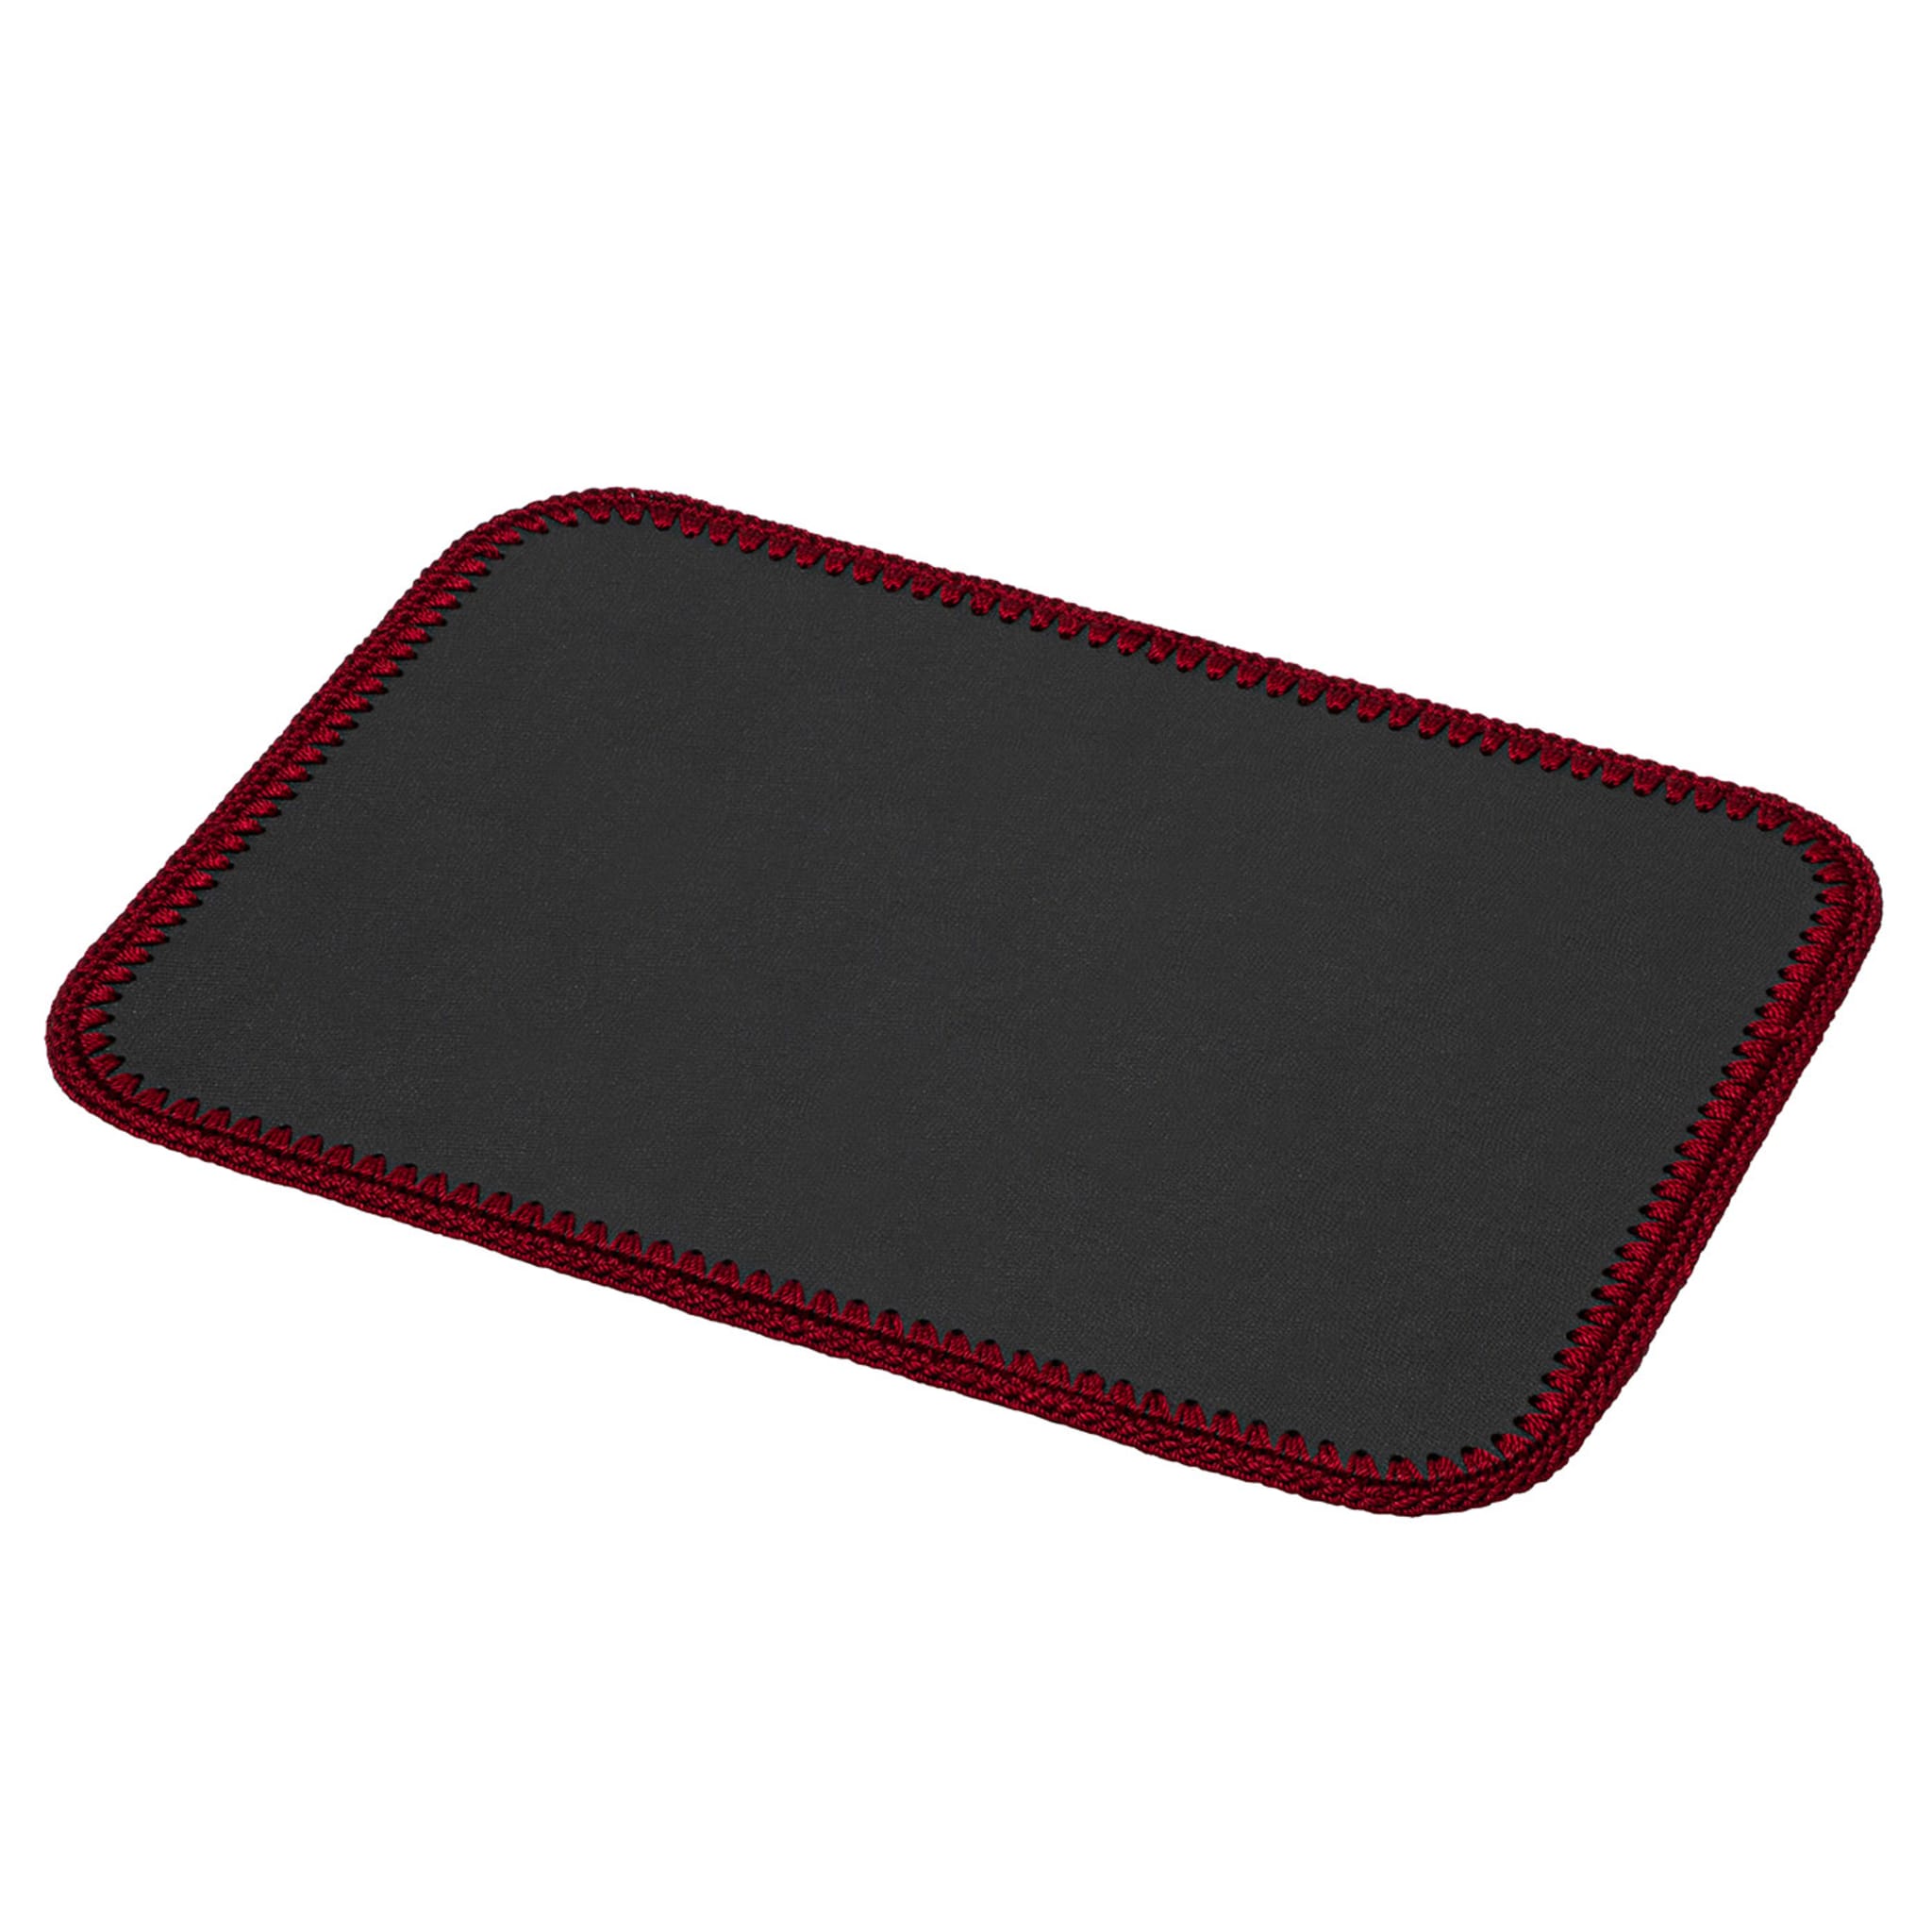 Rochelle Leather & Crochet Placemats Rectangular - Red - Alternative view 2